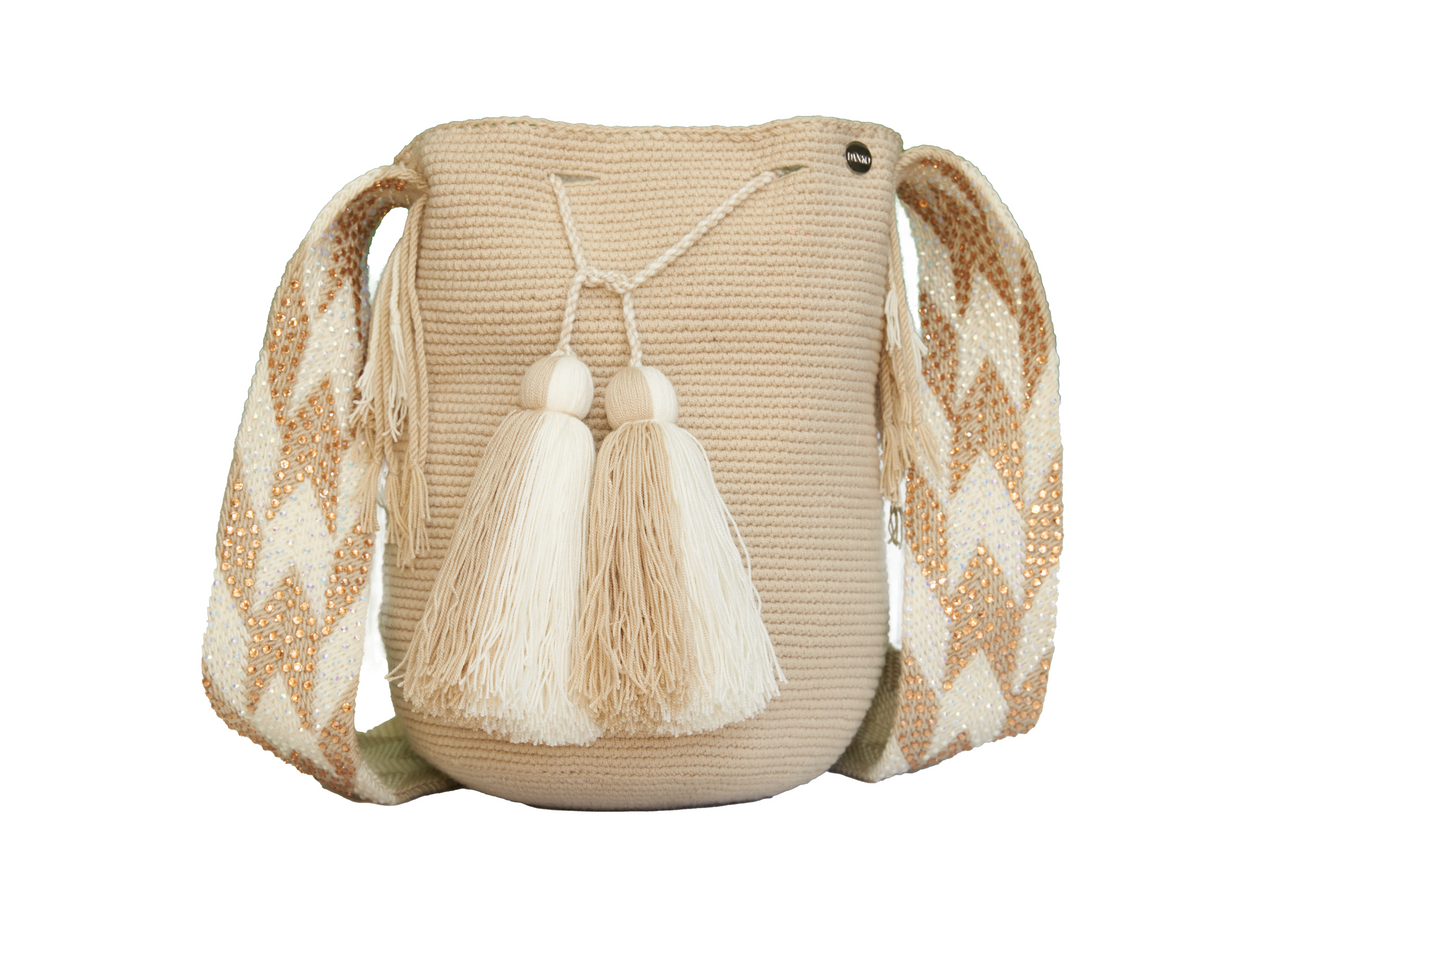 Handmade Beige and White Handbag with gold and silver Gems on the Handel. The bag has 2 tassels in cream and white